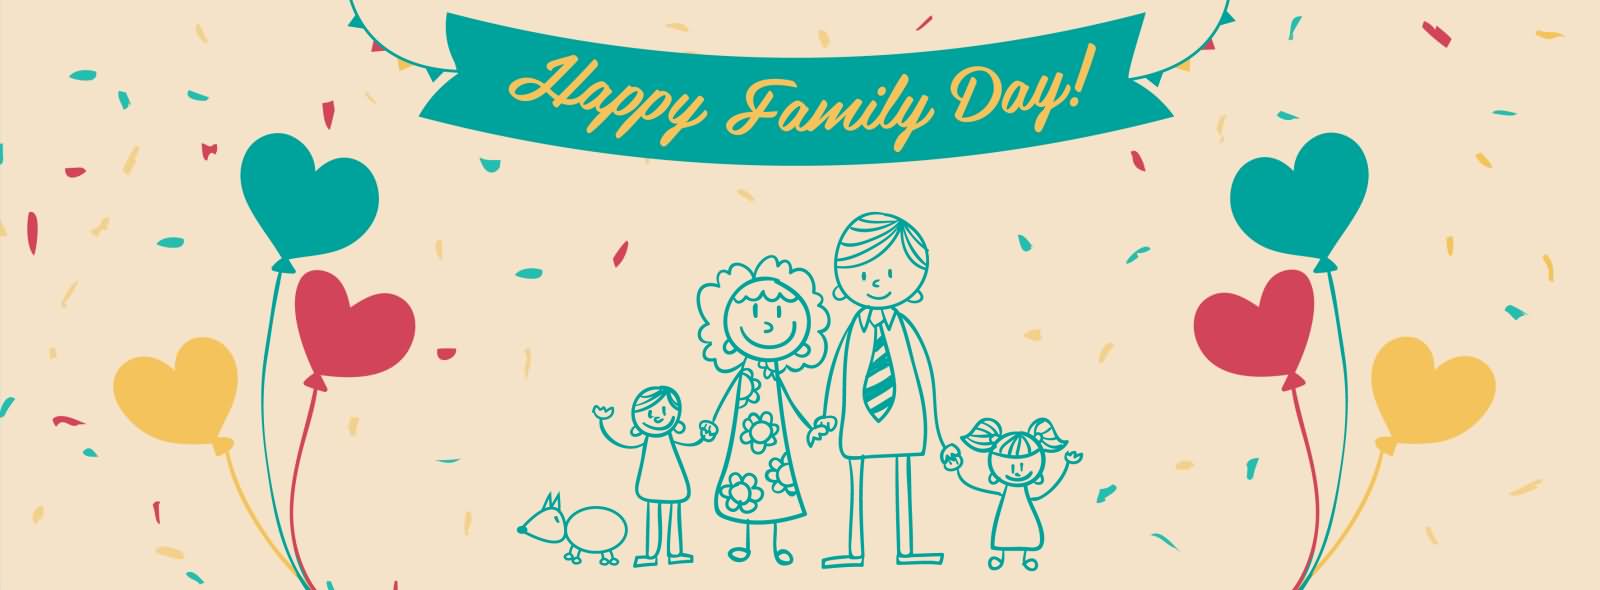 Happy Family Day Beautiful Facebook Cover Picture